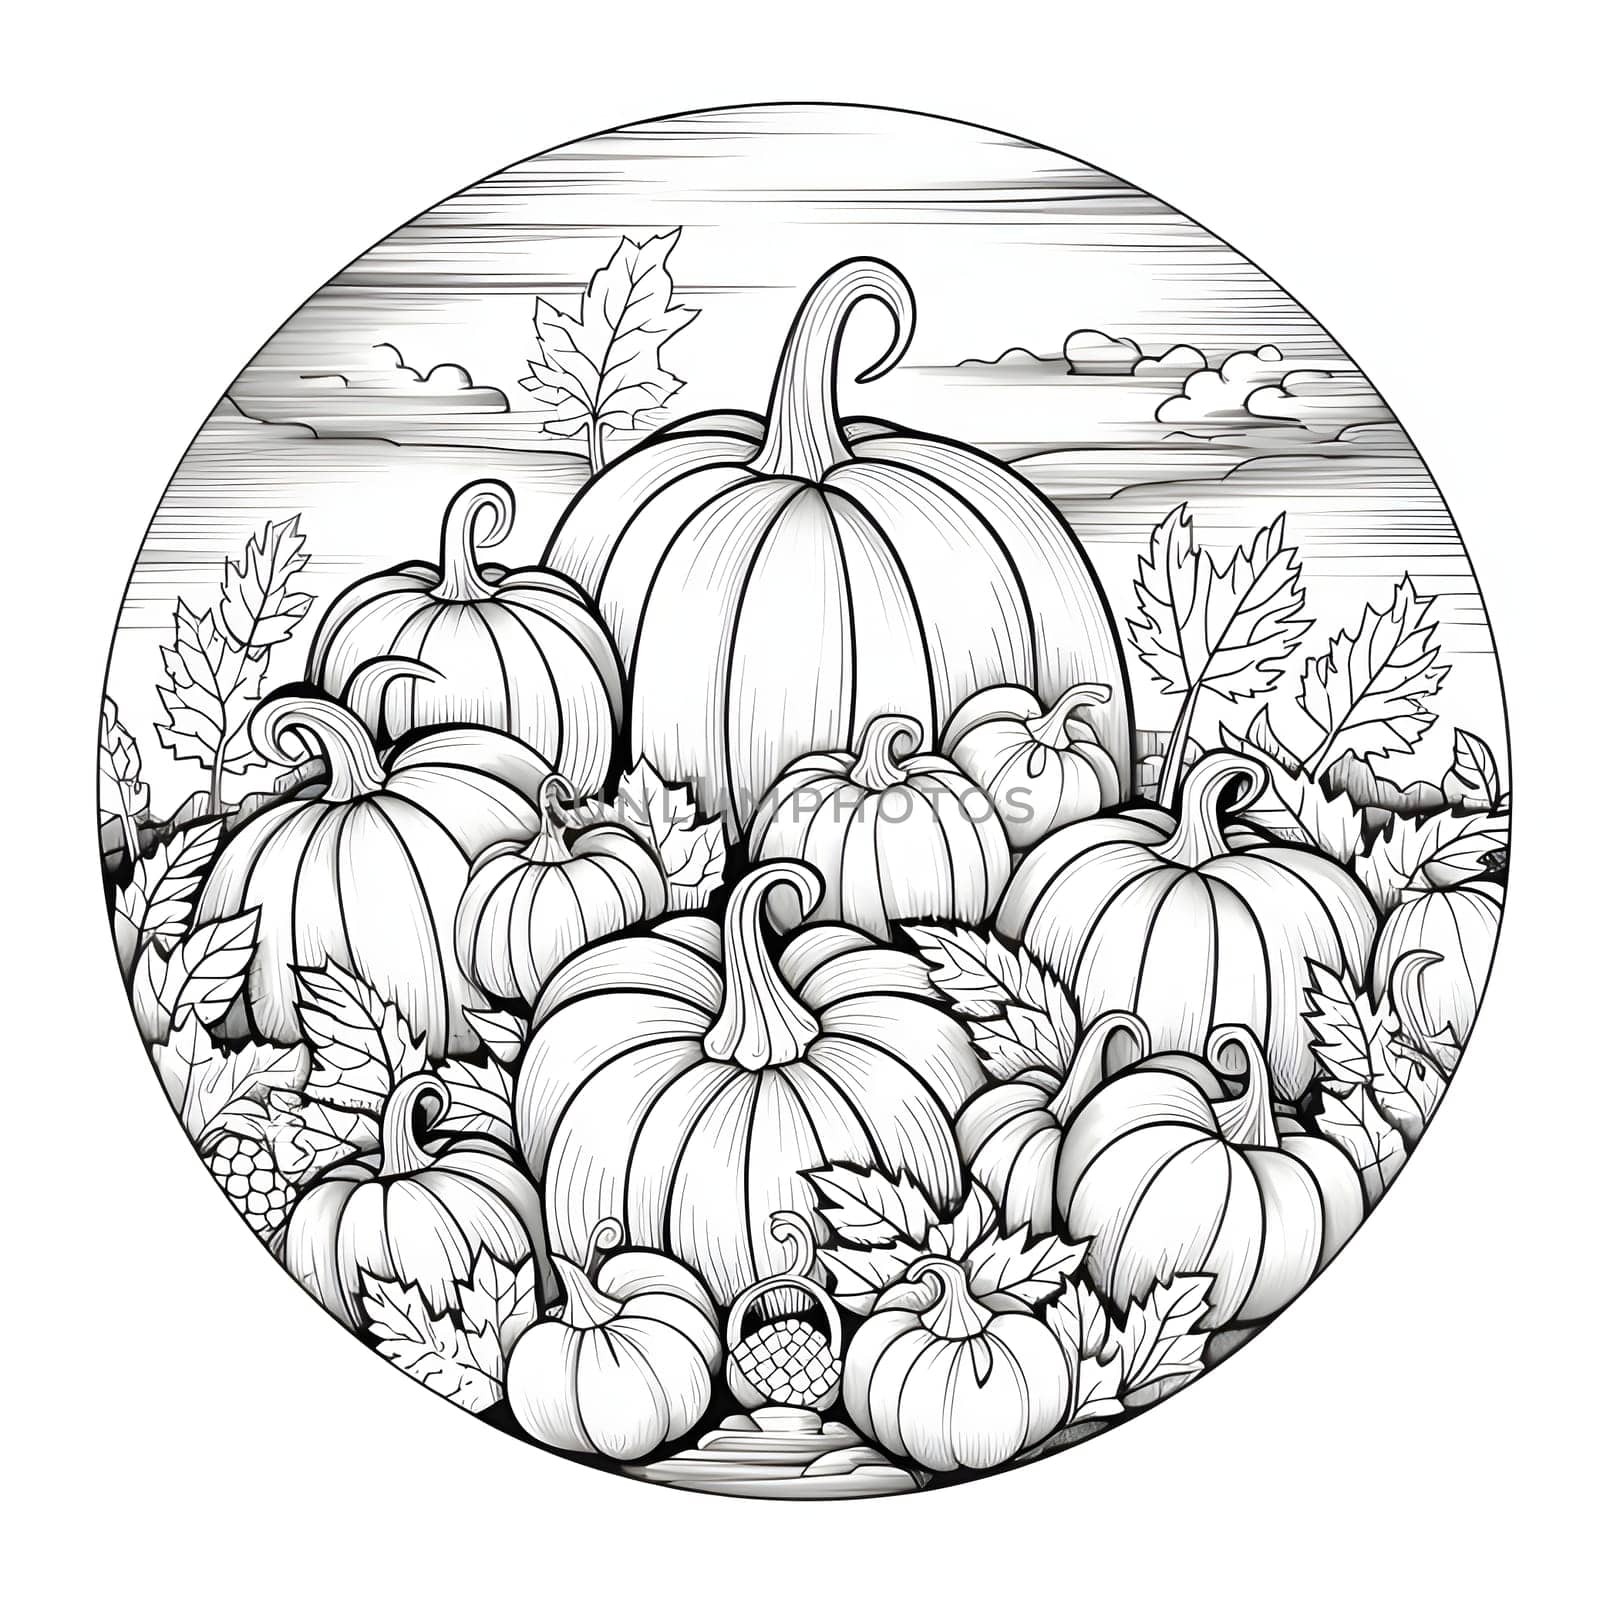 Black and white coloring book in a circle pumpkins and leaves. Pumpkin as a dish of thanksgiving for the harvest, picture on a white isolated background. by ThemesS